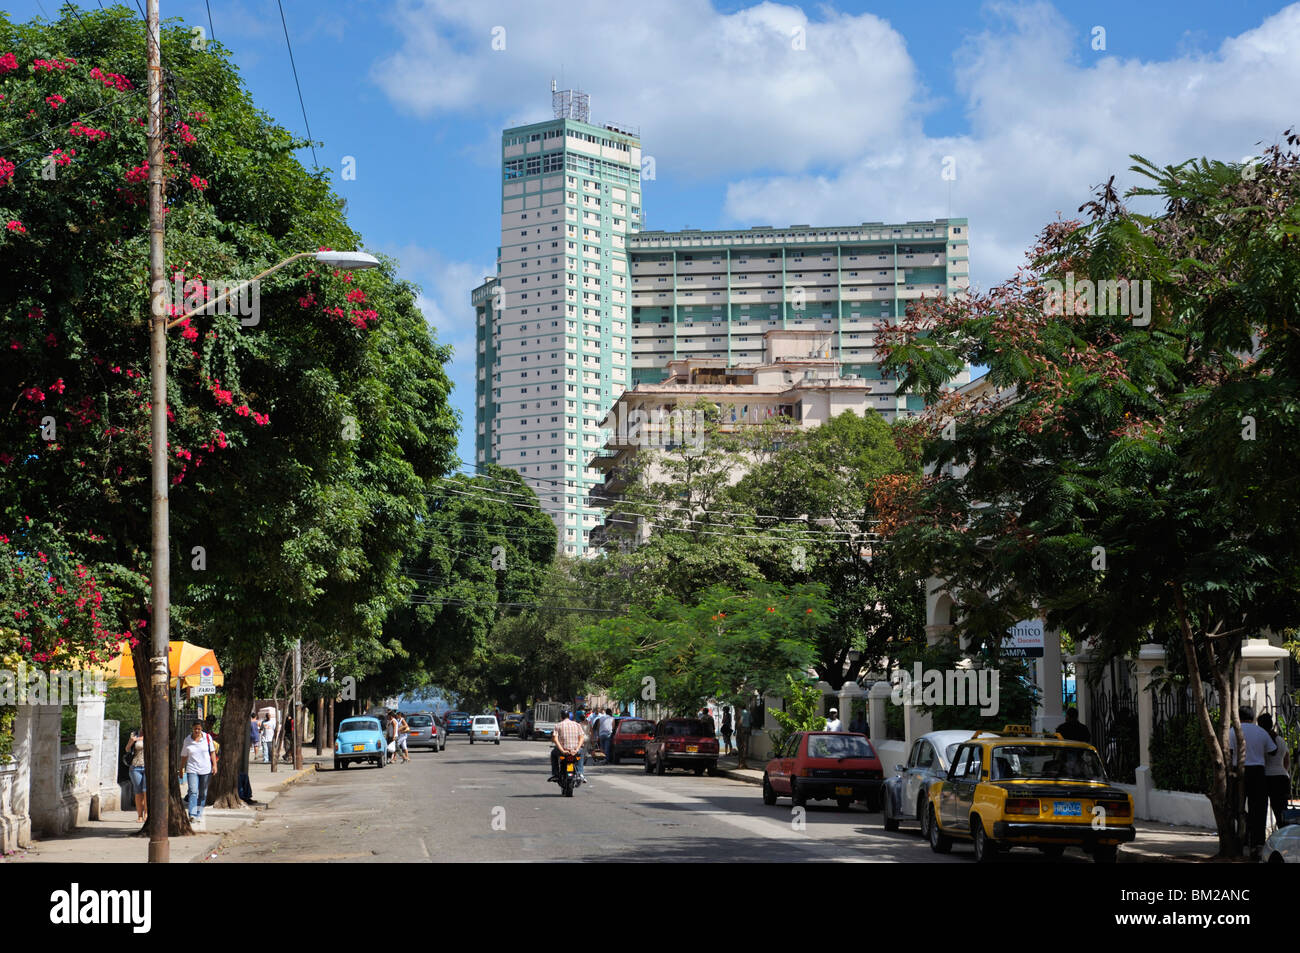 Calle 17 (17th Street) leading to the Focsa Building built in 1956, Vedado, Havana, Cuba, West Indies Stock Photo